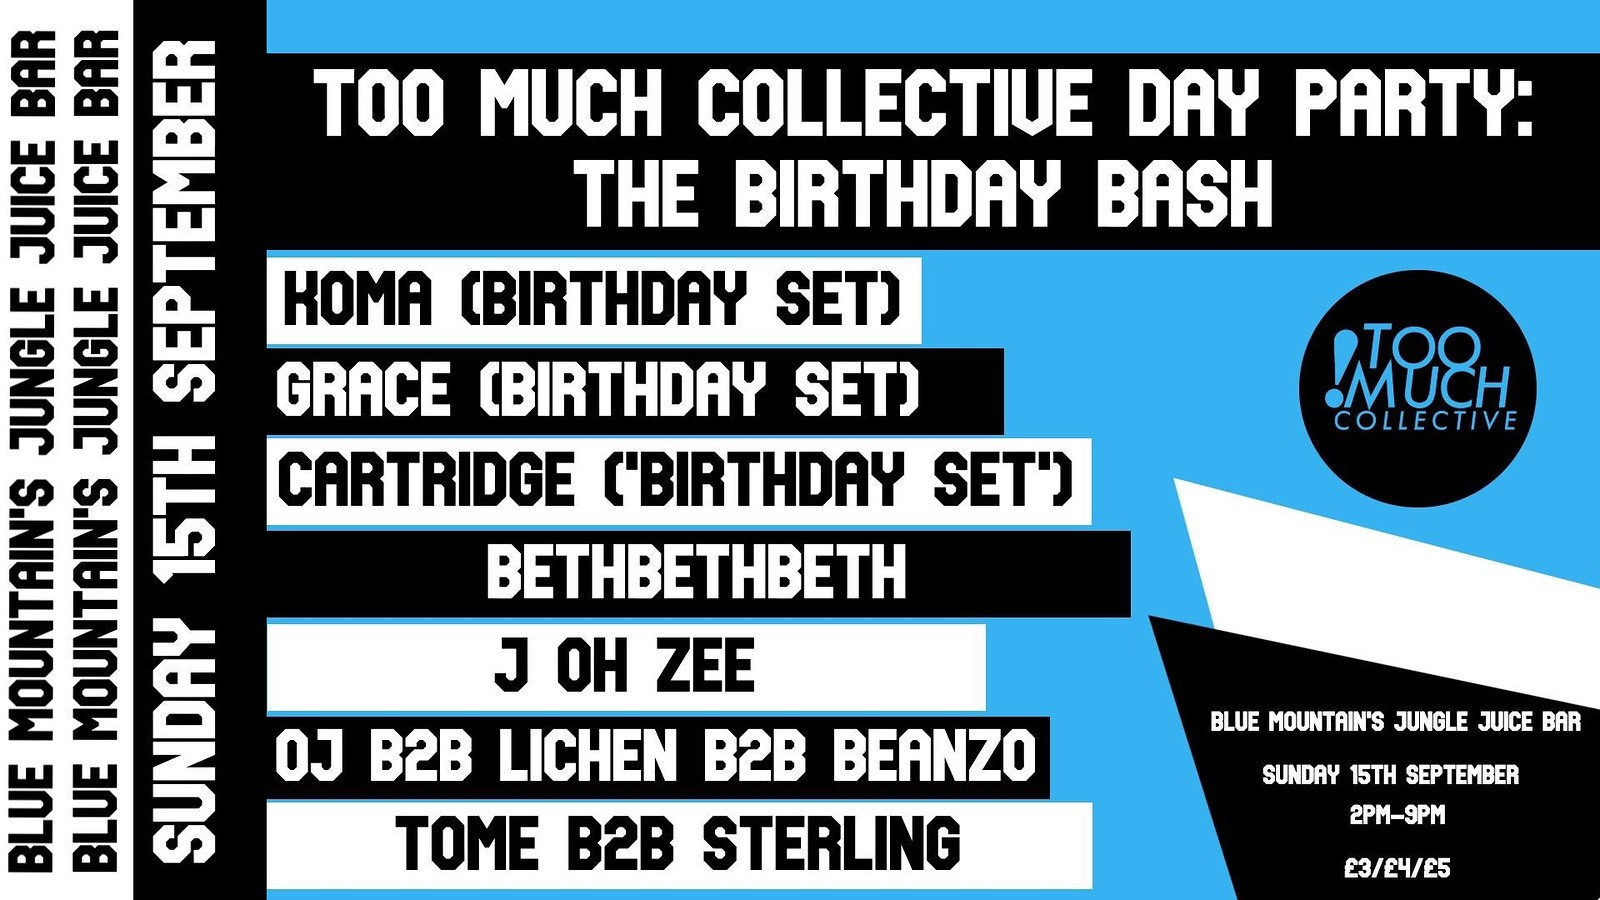 Too Much Collective Day Party: The Birthday Bash at Blue Mountain